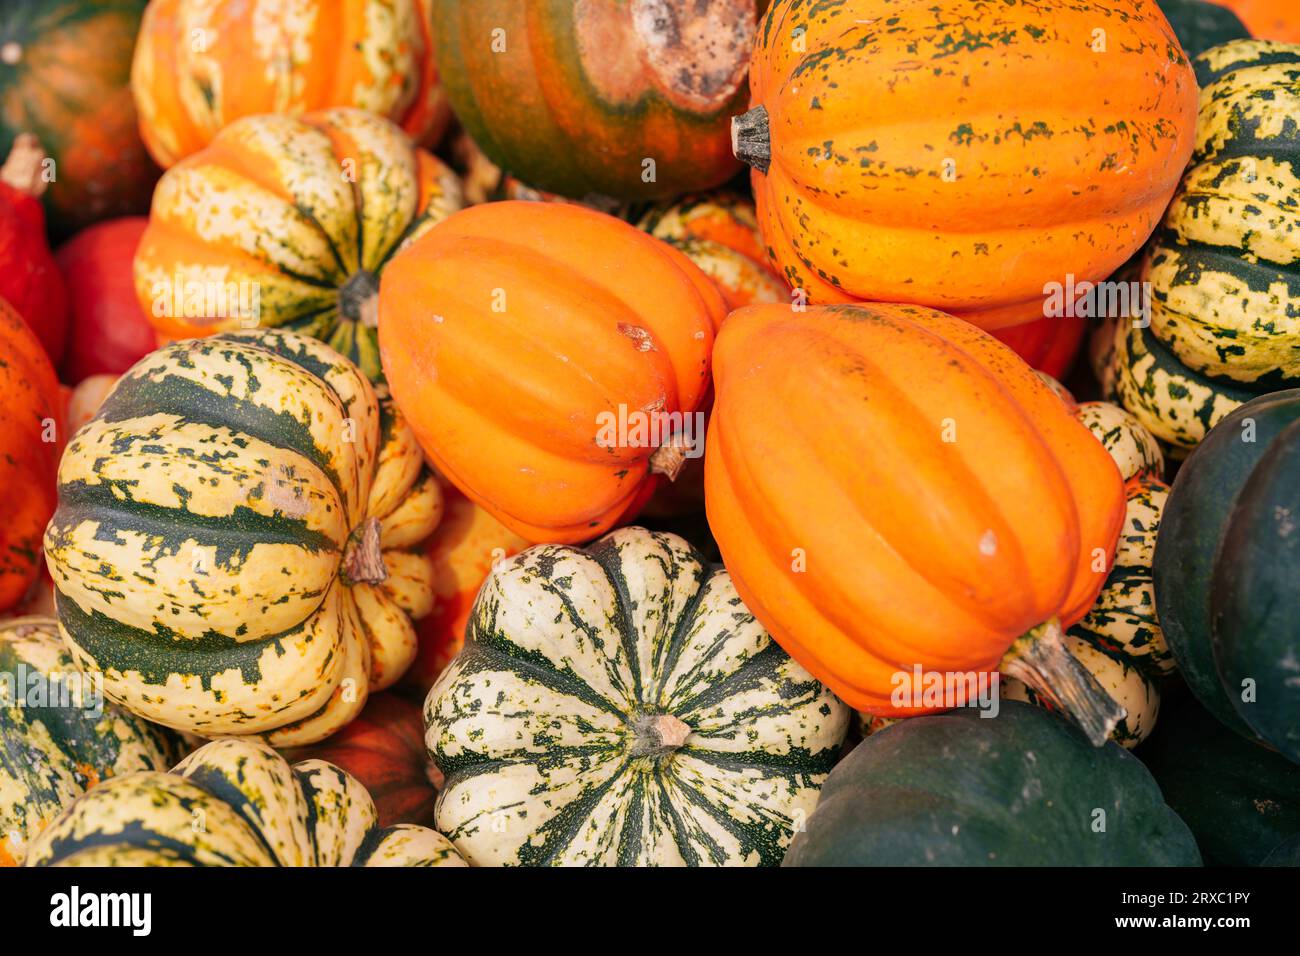 Organic background - a variety of Squash Acorn and sweet pumpkins Stock Photo